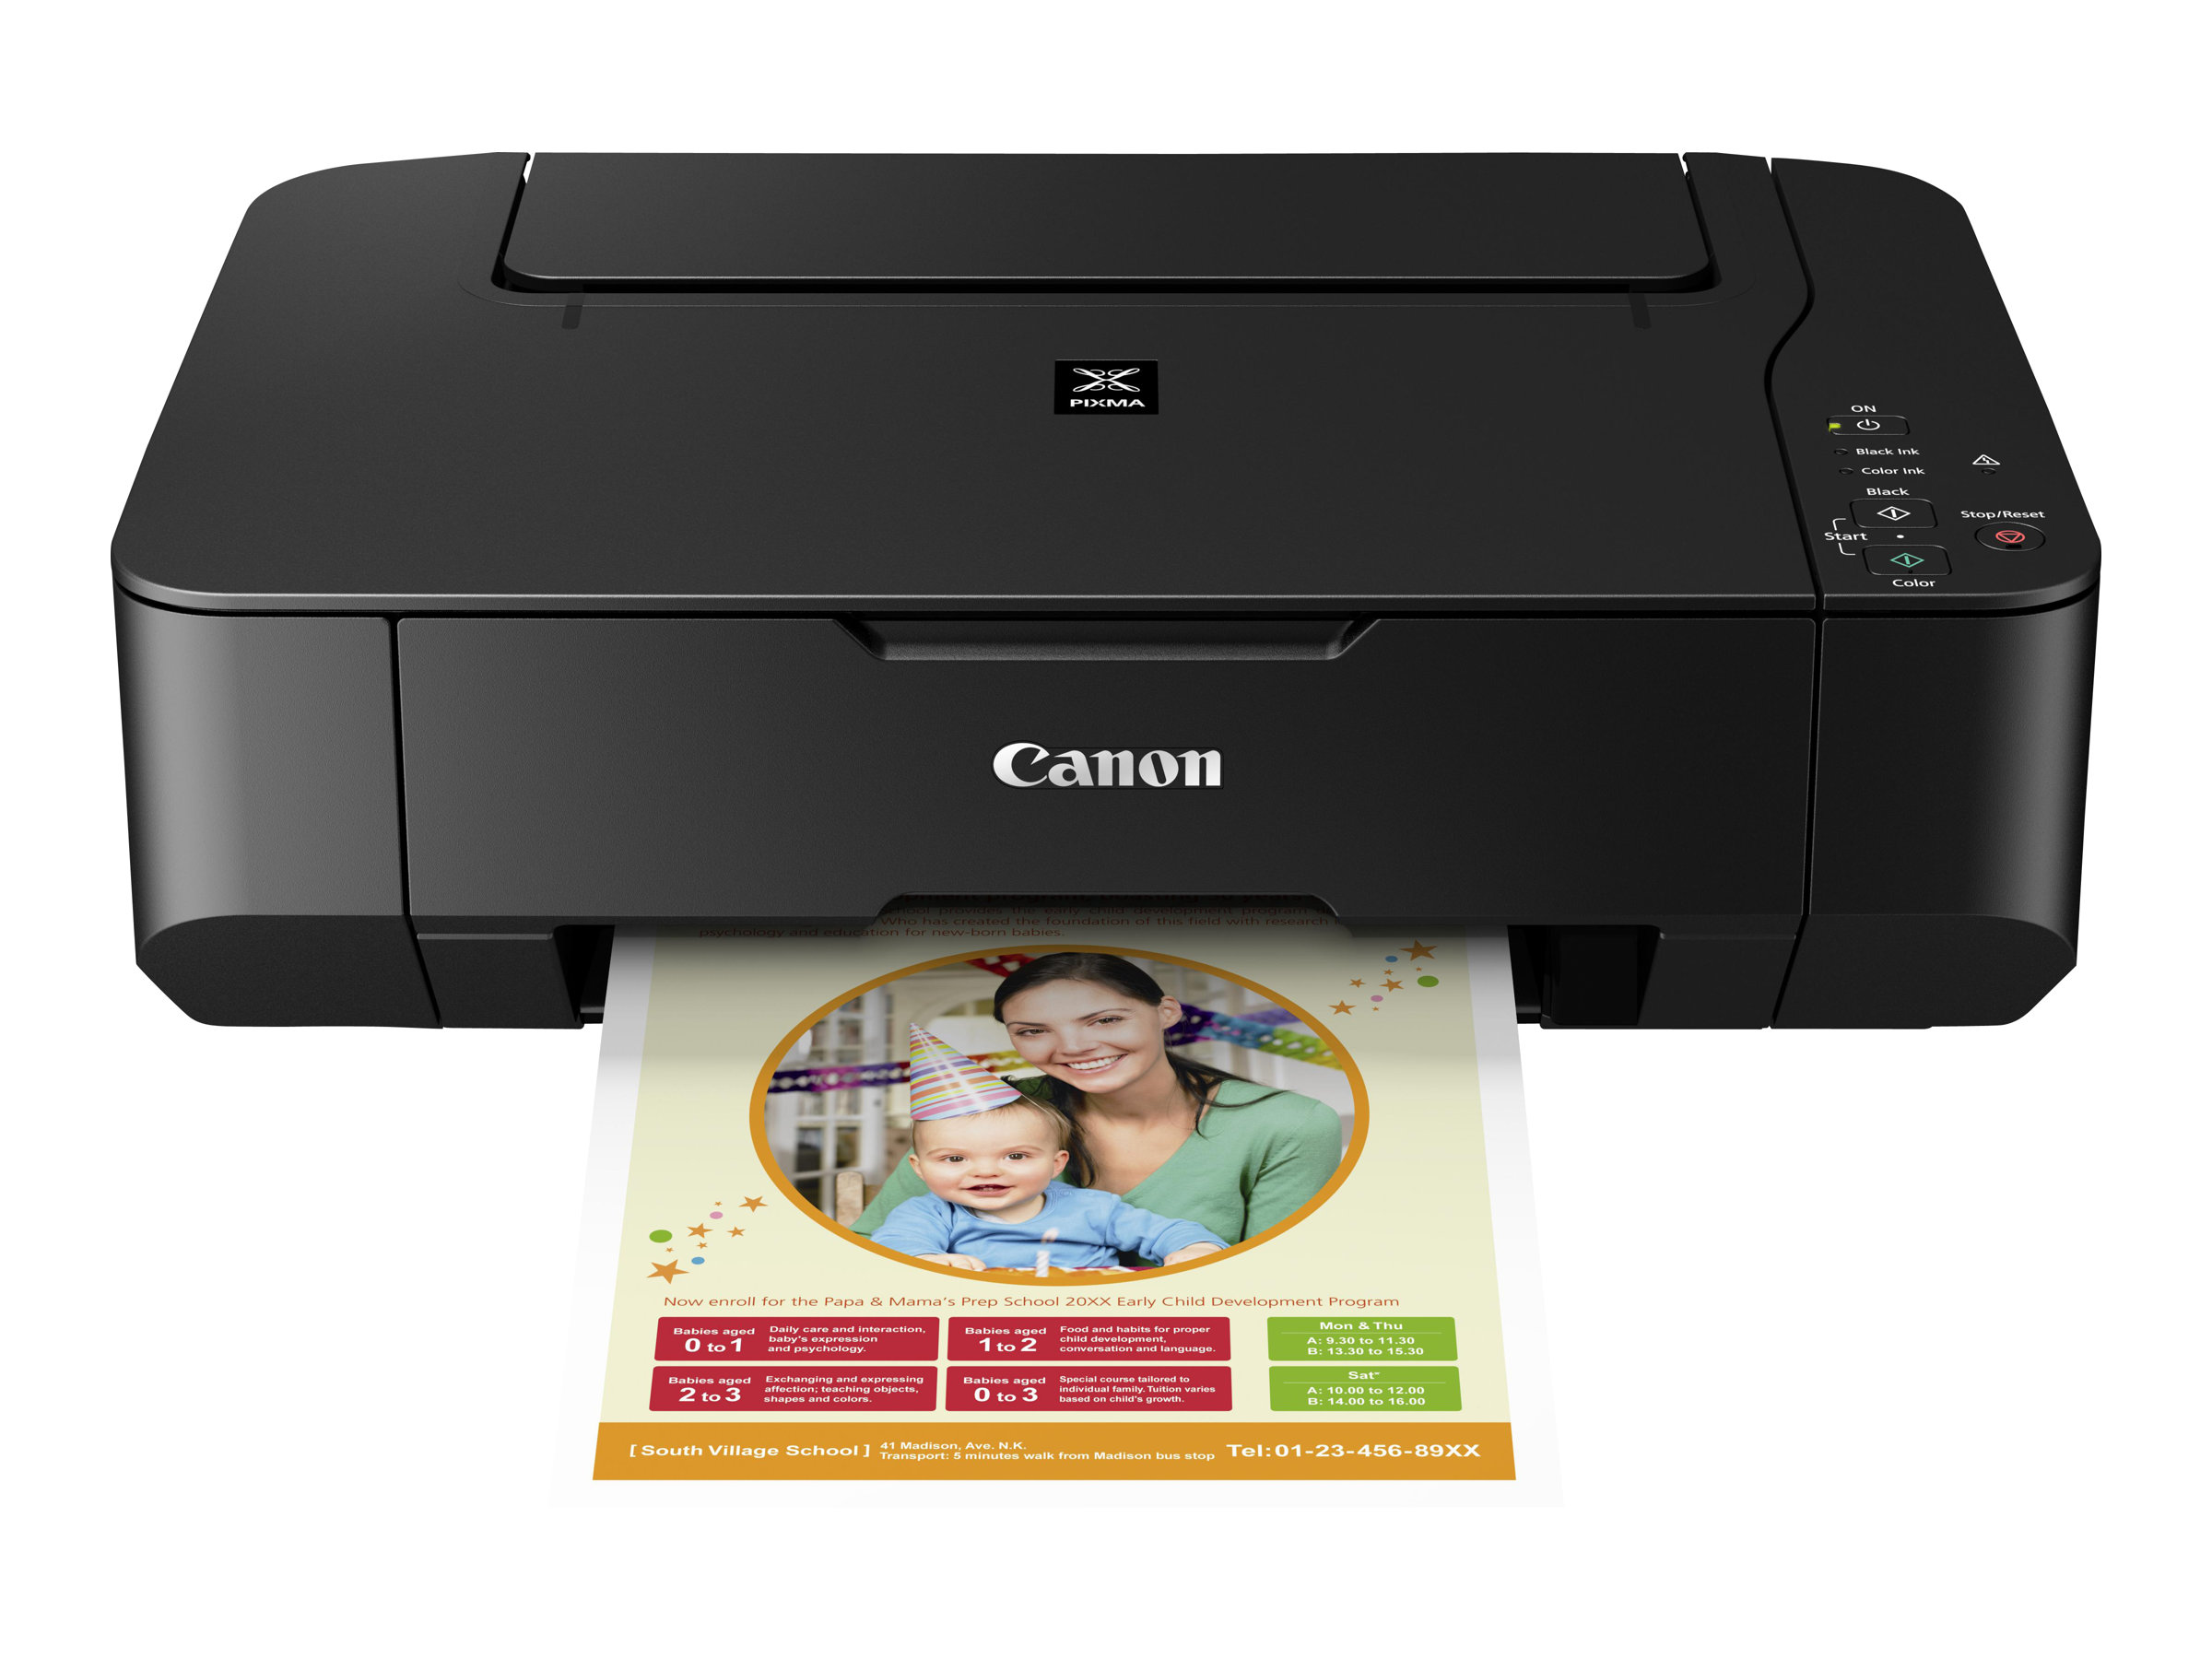 Canon PIXMA MP230 - Multifunction printer - color - ink-jet - 8.5 in x 11.7 in (original) - Legal (media) - up to 7 ipm (printing) - 100 sheets - USB 2.0 - image 2 of 3